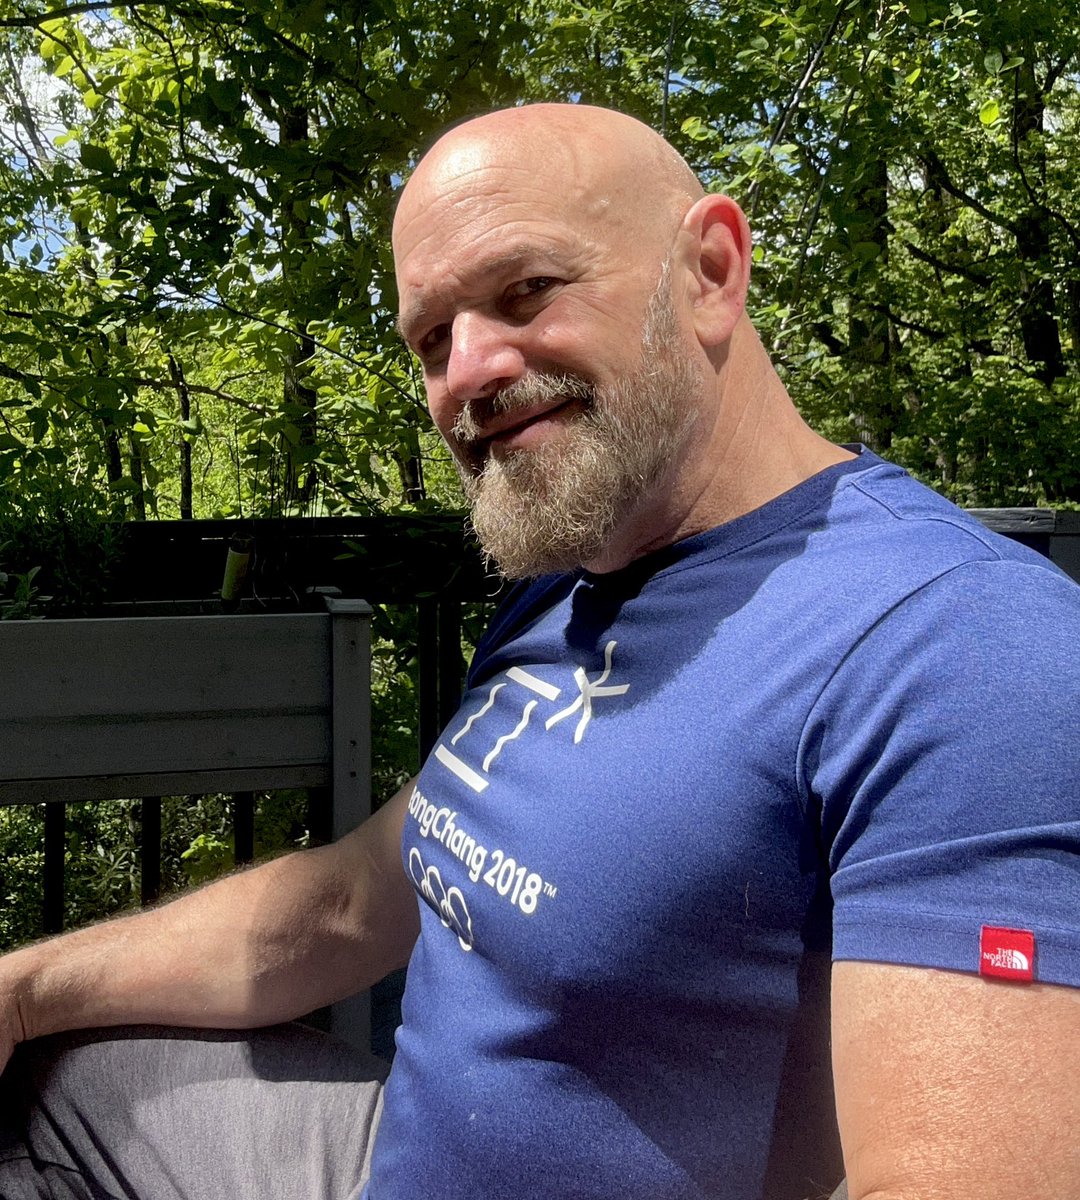 Good chest workout and now enjoying some long-awaited sunshine here in the High Country! #Sunday #oldmanfitness #cancersurvivor